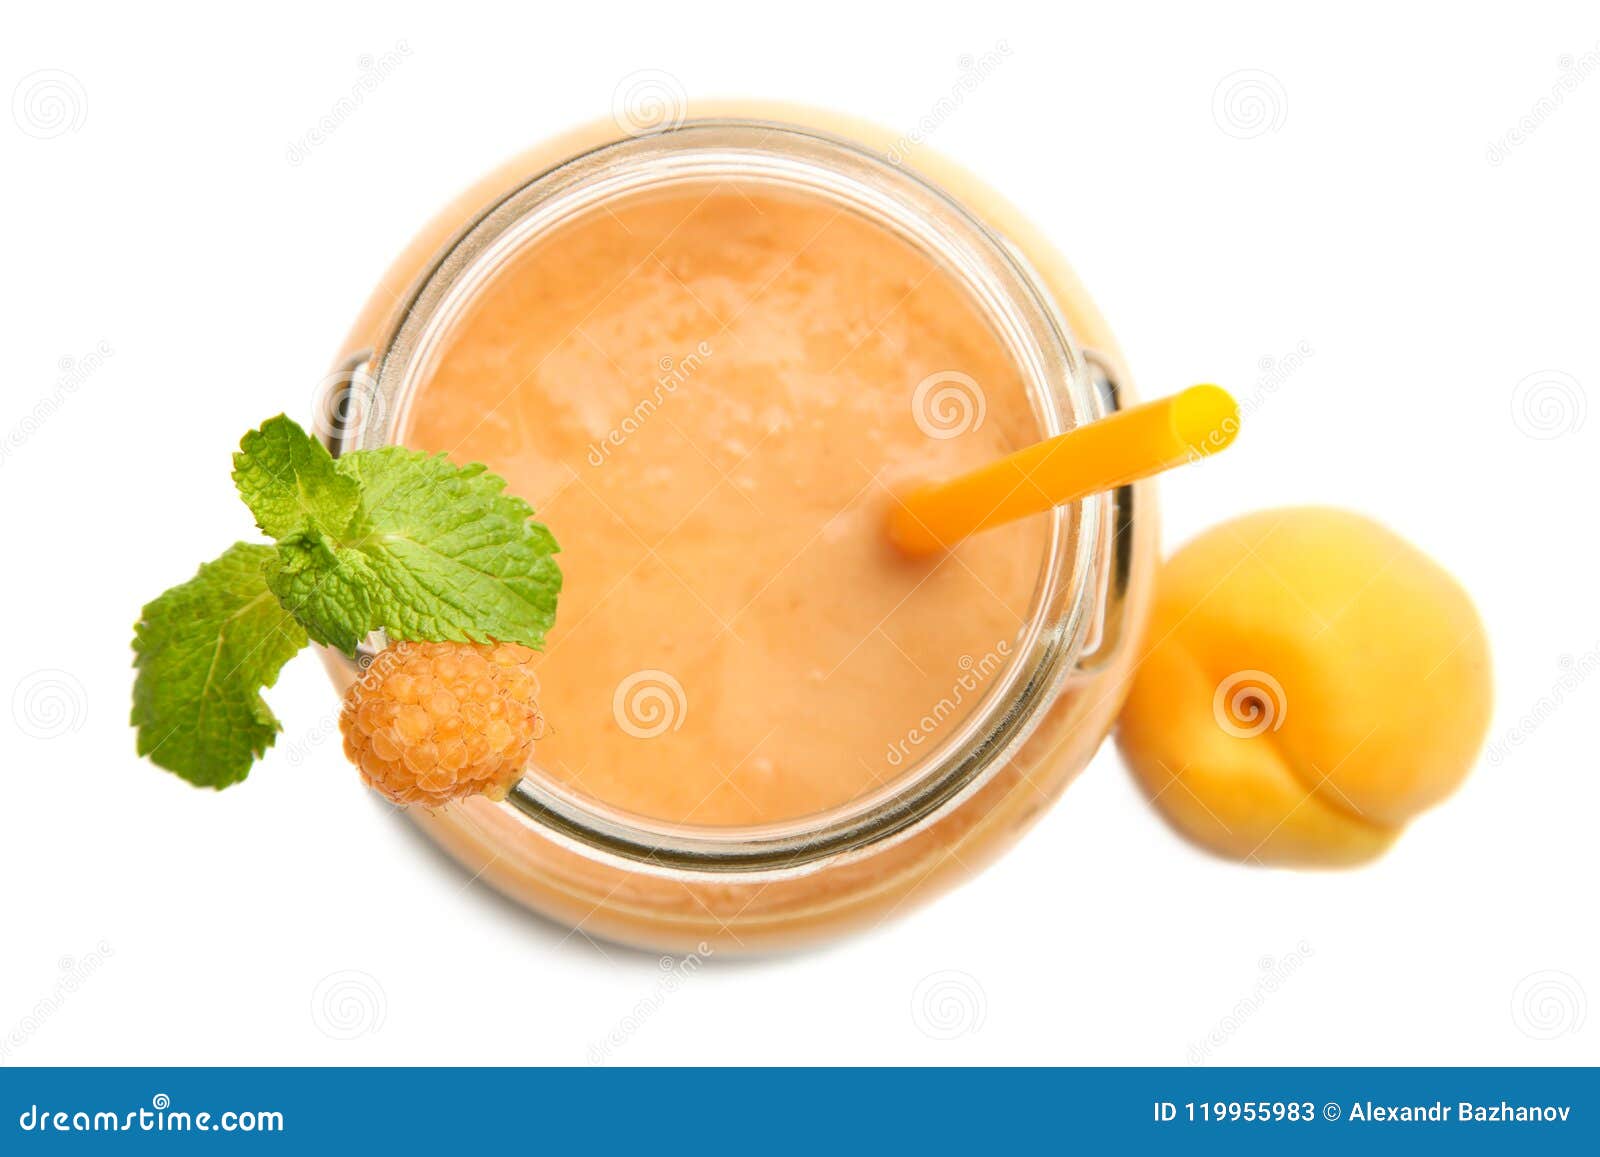 Apricot Smoothies in a Glass Jar Stock Image - Image of nutritious ...